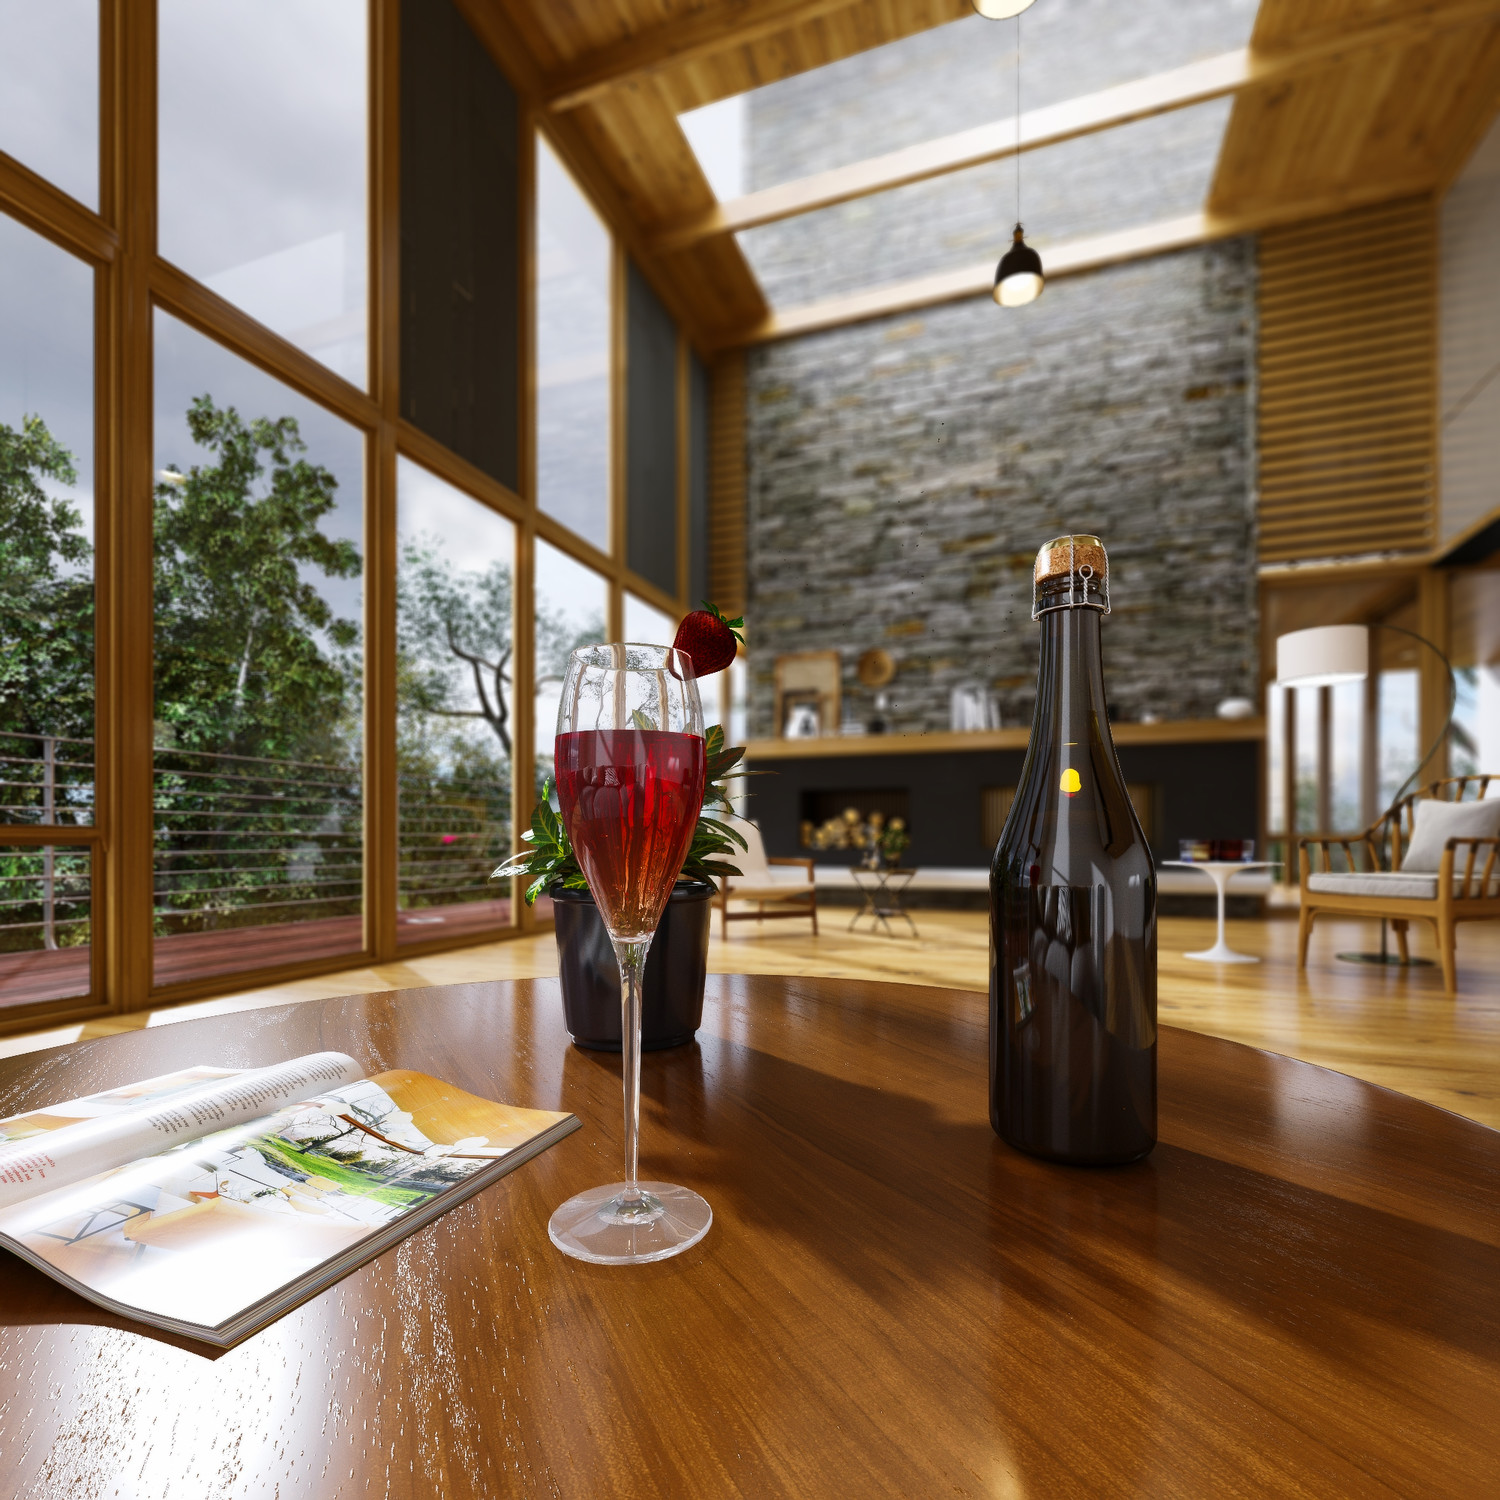 Lake House 3D Rendering Services 3D Interior Rendering Services by JMSDCONSULTANT